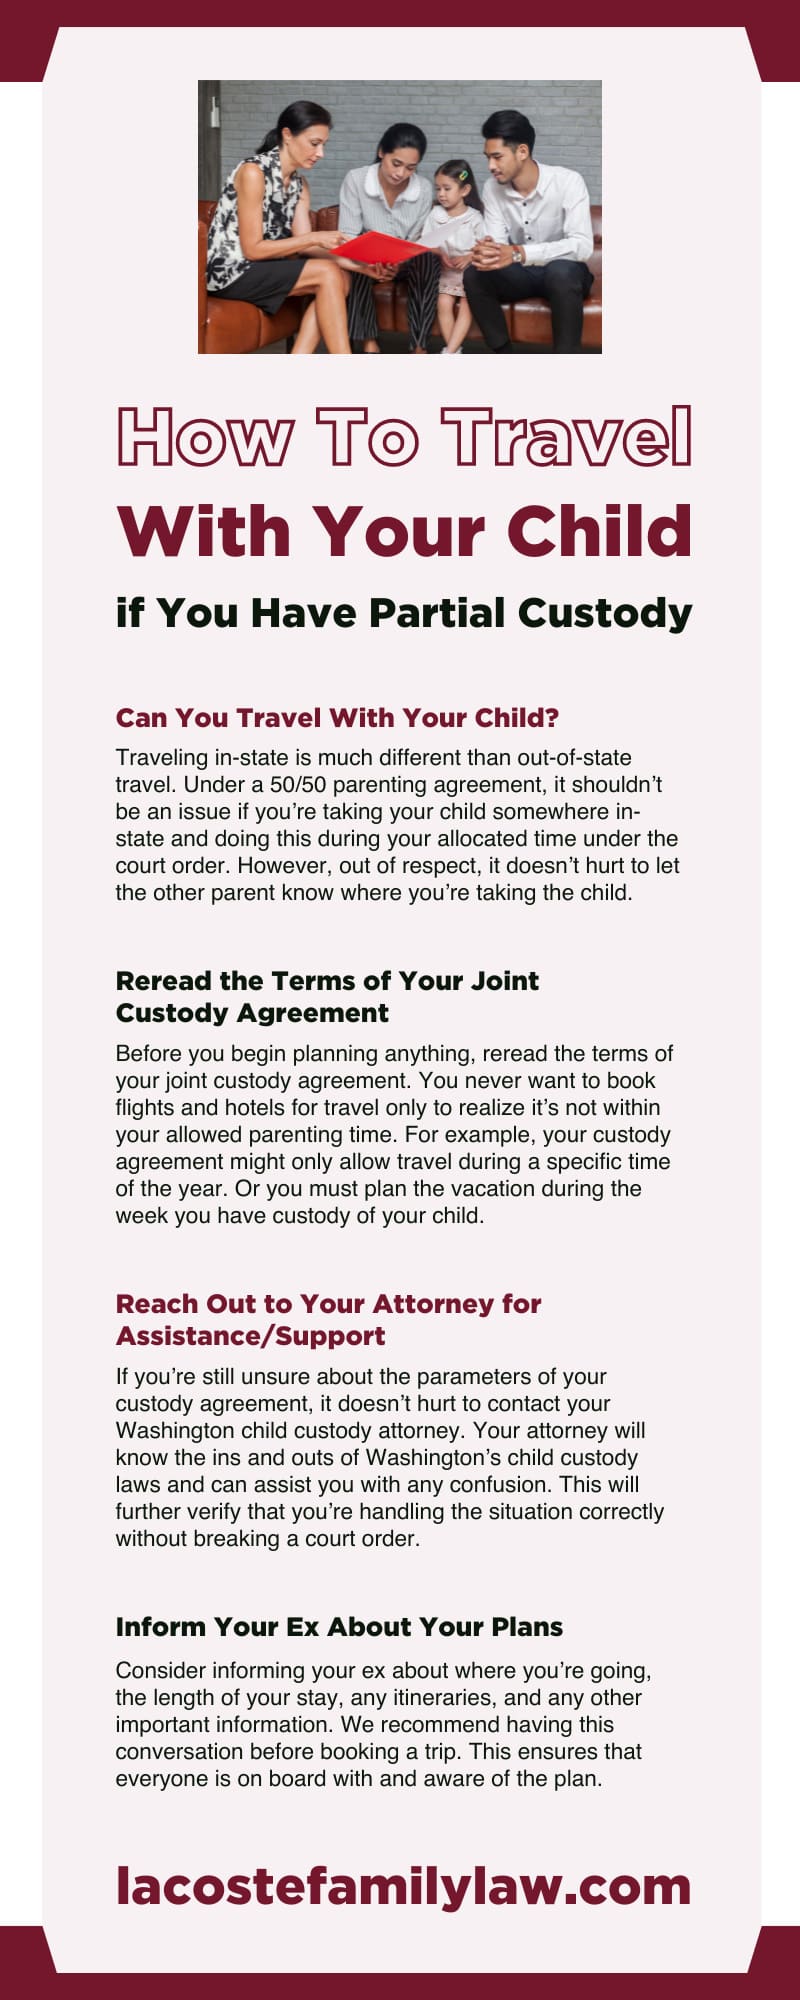 How To Travel With Your Child if You Have Partial Custody